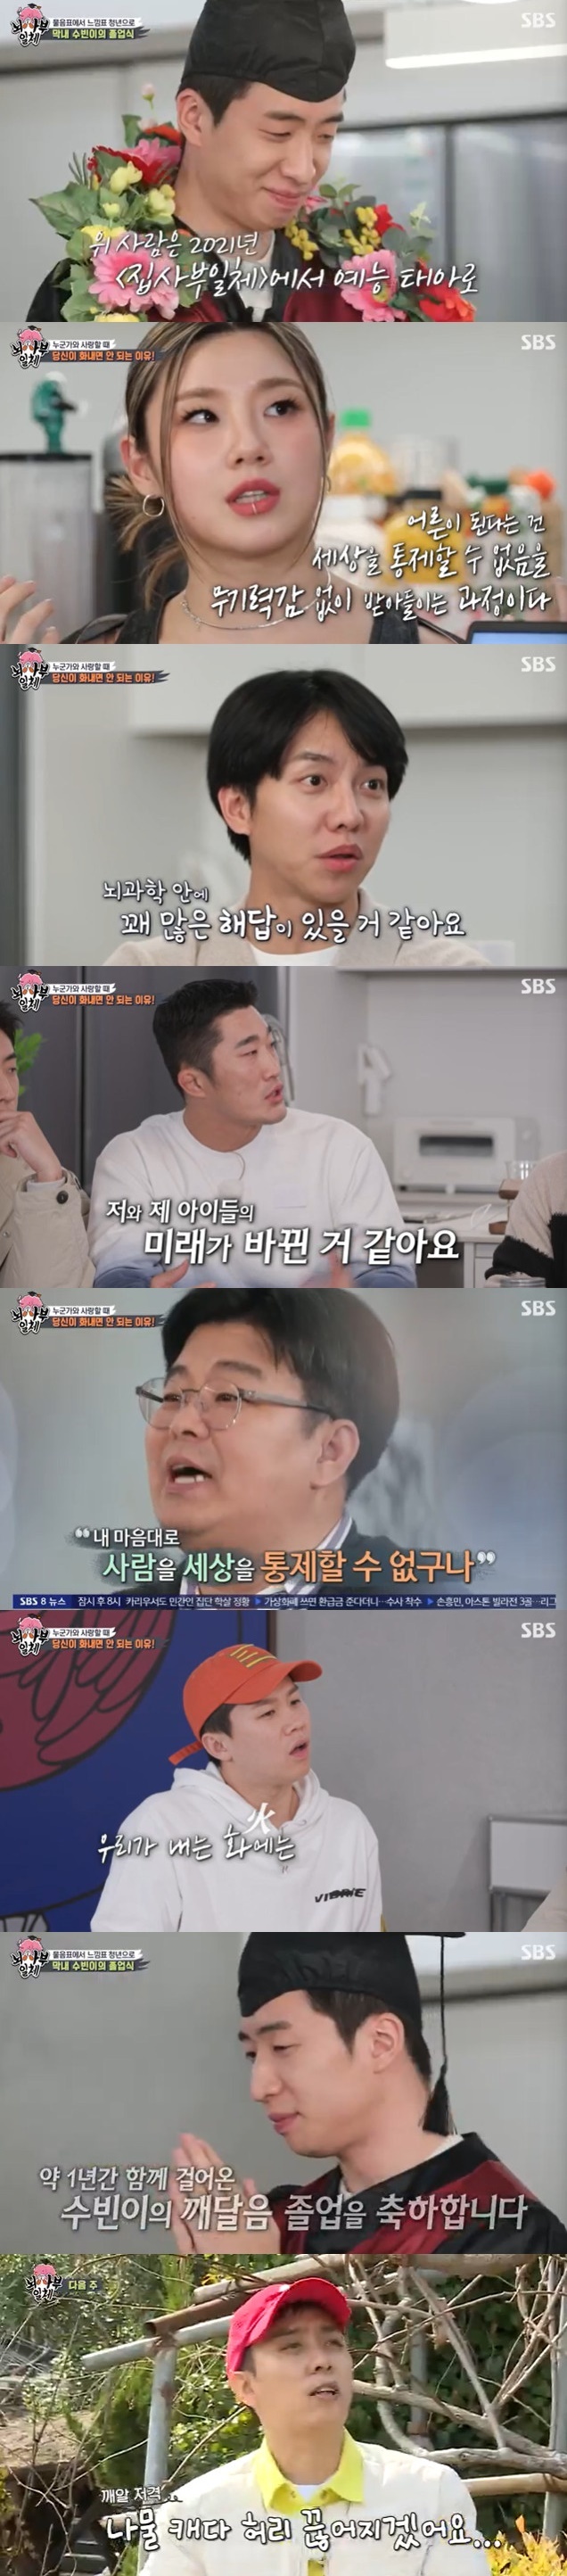 Seoul = = Yoo Soo-bin gave his last greetings while members of All The Butlers learned about love and gained great enlightenment.Lee Seung-gi Yang Se-hyeong Kim Dong-Hyun Yoo-bin Lee Jung, professor of brain engineering at the SBS entertainment program All The Butlers broadcasted on the evening of the 10th, analyzed the emotions that humans usually feel with brain science with KAIST brain engineering Jung Jae-seung.Professor Jung Jae-seung asked the question of love, Does the body respond or the brain respond? Lee Seung-gi cast a vote on the body, saying, Is not Heart a heart?Lee Seung-gi said, If you are interested, you will not be interested in your gaze.Lee said, I do not see it with my eyes, or the brain decides, so the brain is responding.Jung said that he gave a lecture on love in KAIST and explained that there is a relationship between brain and love.He heard Zhangye saying that when a six-month-old student fell in love saw a picture of his boyfriend, various areas of the brain were activated.Yang Se-hyeong also said he did not believe in love at first sight. He said, I think it is a popular person who looks at appearance, clothes style, and even if it is popular at first sight.In fact, if I and Lee Seung-gi win the game, you are more likely to be against each other at first sight. When Lee said, It is not, Yang Se-hyeong laughed at the rejection of the sympathy vote, saying, Do not look at me like that.Lee said, When I appeared as a Swoopa master, I told my friends, I think my ideal type will change into Yang Se-hyeong brother.The members also talked about jealousy related to love.Professor Jung Jae-seung said, Both the sesame leaf debate and the carpool debate, which have become a hot topic recently, can cause misunderstandings, and it is interesting because there are many such things in modern society.As a brain scientist, I am not right, but I am curious about what happens in the brain when this situation is over. Many areas of the brain are involved in jealousy.All areas that govern love, control and fear are activated. All three are linked to love.The more I love, the more likely I am to react to this problem more sensitively and I want to control it, but I can not bear the relationship with someone else I can not control. On the other hand, if I know that I am confident and nothing will happen to me, I do not feel any fear.Professor Jung Jae-seung also said that if you love, you should not be angry.He said, I am angry and threatening because the situation is not controlled by his own will, he said, referring to the example of an angry truth guest. In this case, I can see those people as compassion. The person who is most angry in our lives is the person closest to me, he said. There is a difference between the area of ​​recognizing me and the area of ​​recognizing others. My mother and the person close to me are closest to my area.I am trying to control myself because I am the closest to me, he said. Being an adult is a process of accepting and accepting without helplessness that I can not control people and the world at my disposal.In fact, I can not control my mother at will, and my child should be seen as an independent being, he added. It is real love to accept it.Kim Dong-Hyun said, I think my childrens life has changed with learning today. Lee Seung-gi also said, I thought science is only technology that benefits humans, but I found that healing is possible in mind and mind.Lee also added, I always thought it was my fault that I could not control it, but I think it is the process of becoming an adult.Finally, Lee Seung-gi said, Today is the day when our youngest Subin is doing All The Butlers The Graduate.  Subin is really proud to go to such a good class together. Yoo Soo-bin stood in Bachelors hair with The Graduate gown, and the members shared the last with a corollary and cake; Yoo Soo-bin shared the final greetings with the members and crew.The trailer that appeared followed the joining of new member Eun Ji-won.